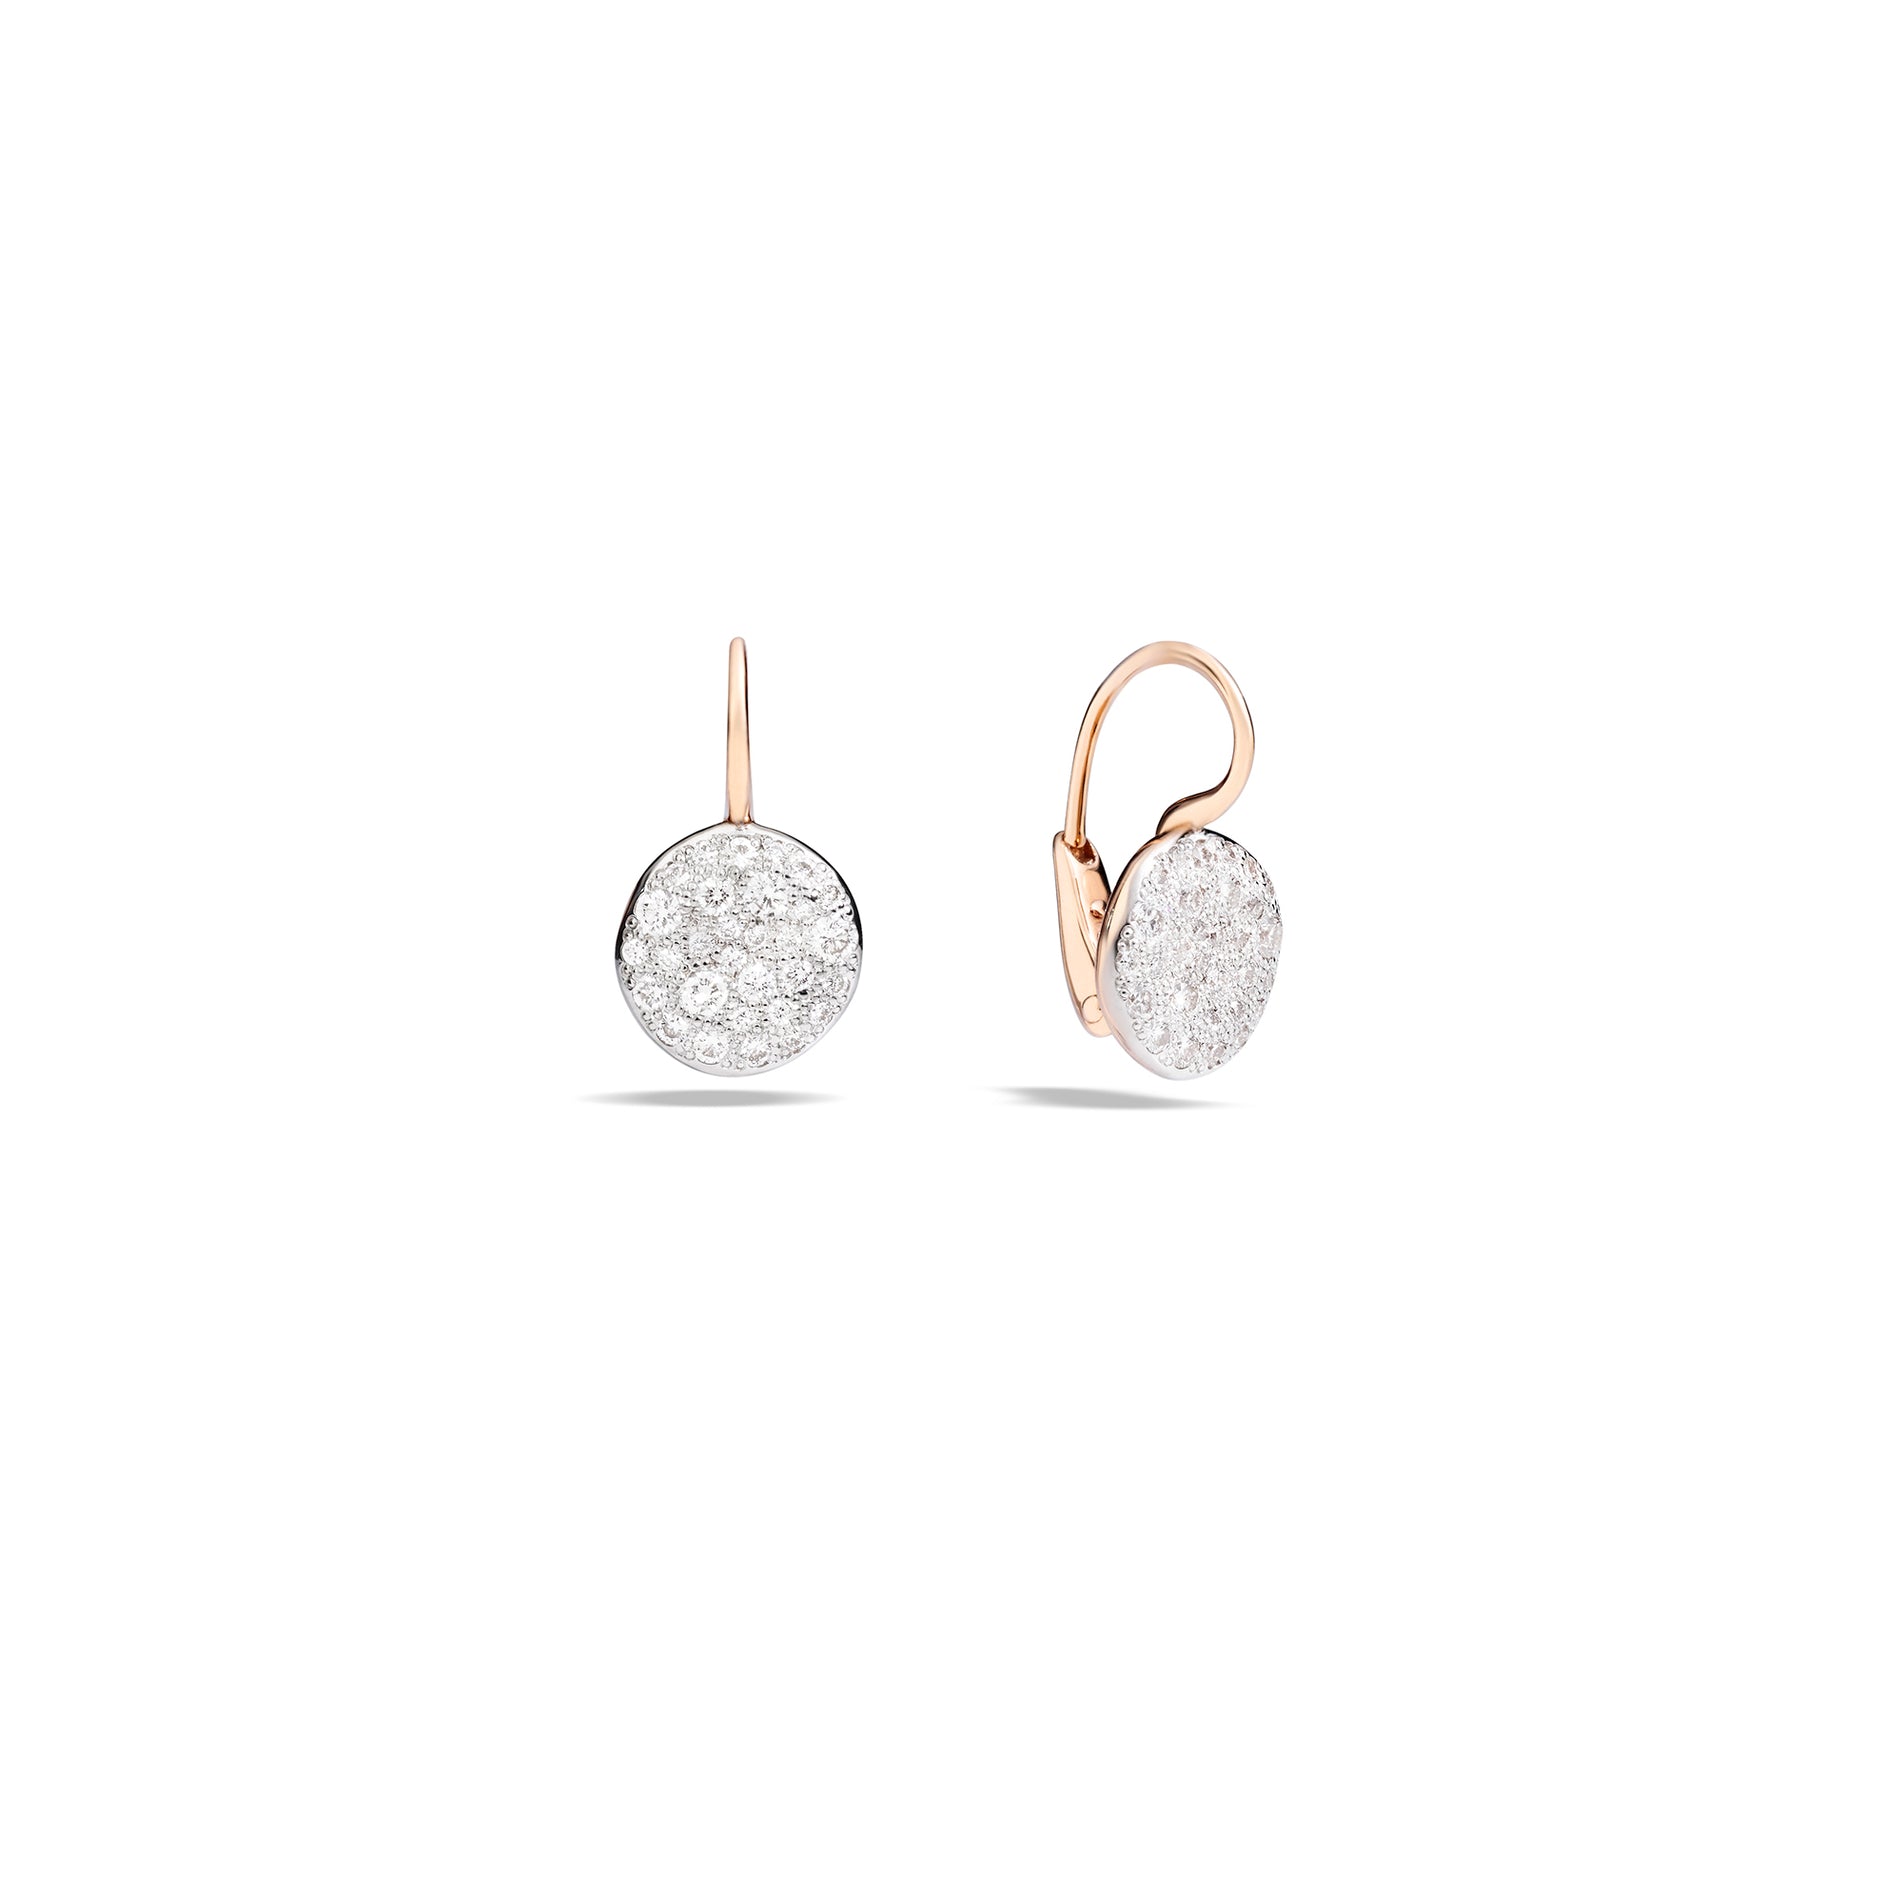 Sabbia Earrings in 18k Rose Gold with Pave Diamonds - Orsini Jewellers NZ